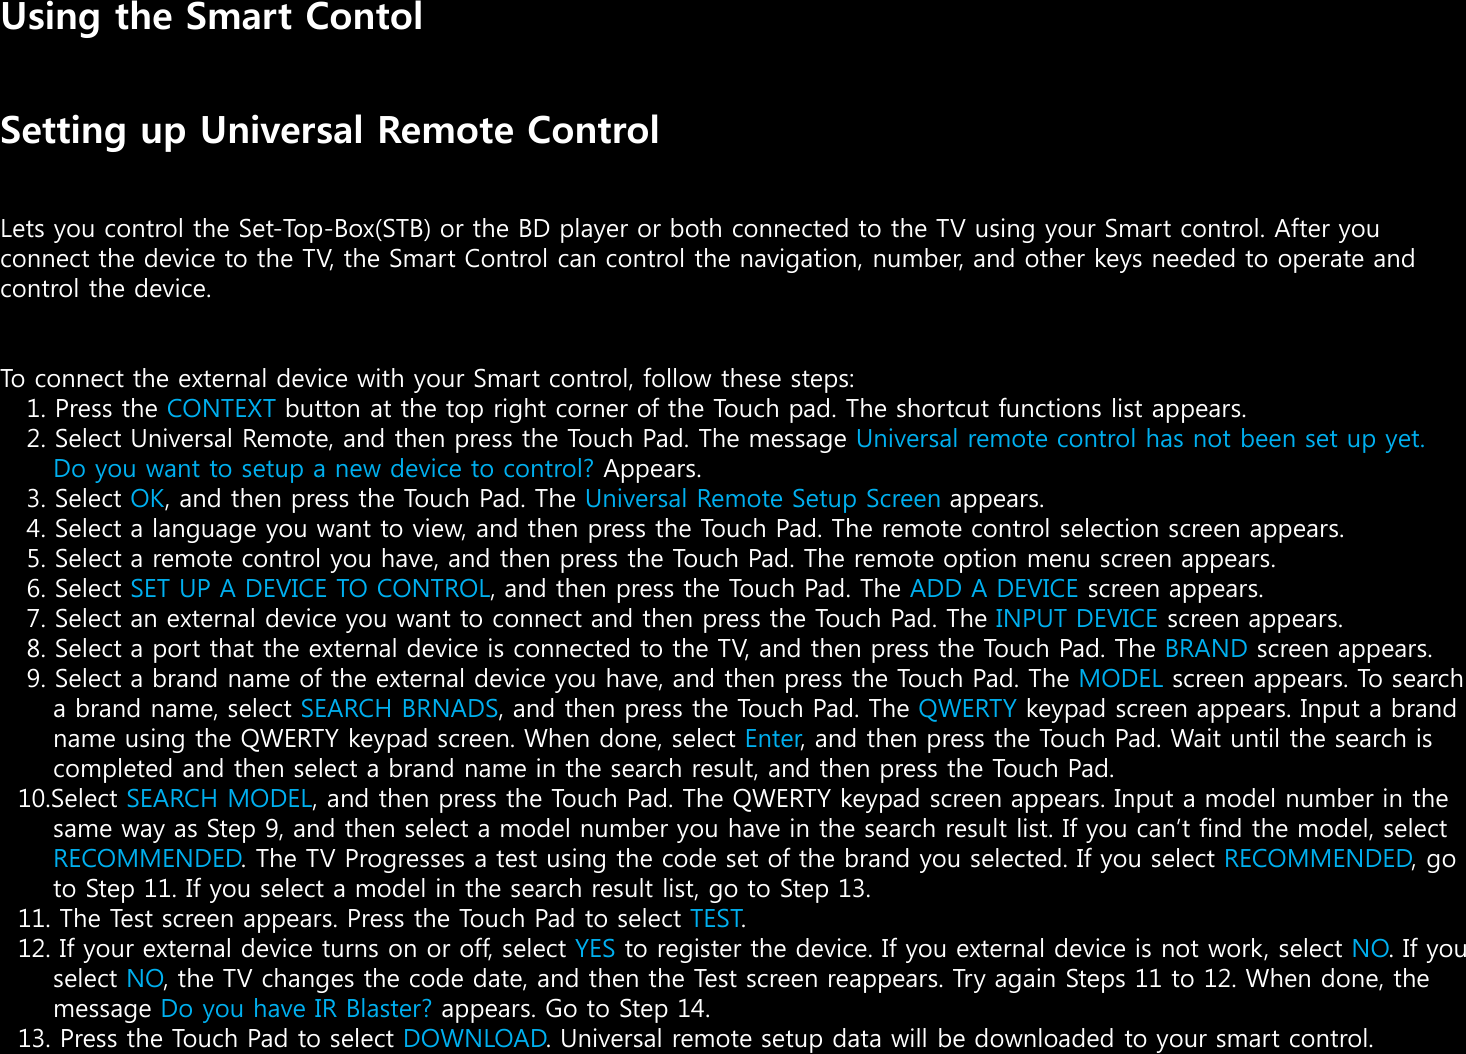 Using the Smart ContolSetting up Universal Remote ControlLets you control the Set-Top-Box(STB) or the BD player or both connected to the TV using your Smart control. After you connect the device to the TV, the Smart Control can control the navigation, number, and other keys needed to operate and control the device.To connect the external device with your Smart control, follow these steps:1. Press the CONTEXT button at the top right corner of the Touch pad. The shortcut functions list appears.2. Select Universal Remote, and then press the Touch Pad. The message Universal remote control has not been set up yet. Do you want to setup a new device to control? Appears.3. Select OK, and then press the Touch Pad. The Universal Remote Setup Screen appears.4. Select a language you want to view, and then press the Touch Pad. The remote control selection screen appears.5. Select a remote control you have, and then press the Touch Pad. The remote option menu screen appears.“. Select SET UP A DEVICE TO CONTROL, and then press the Touch Pad. The ADD A DEVICE screen appears.”. Select an external device you want to connect and then press the Touch Pad. The INPUT DEVICE screen appears.‘. Select a port that the external device is connected to the TV, and then press the Touch Pad. The BRAND screen appears.’. Select a brand name of the external device you have, and then press the Touch Pad. The MODEL screen appears. To search a brand name, select SEARCH BRNADS, and then press the Touch Pad. The QWERTY keypad screen appears. Input a brand name using the QWERTY keypad screen. When done, select Enter, and then press the Touch Pad. Wait until the search is completed and then select a brand name in the search result, and then press the Touch Pad.10.Select SEARCH MODEL, and then press the Touch Pad. The QWERTY keypad screen appears. Input a model number in the same way as Step ’, and then select a model number you have in the search result list. If you cant find the model, select RECOMMENDED. The TV Progresses a test using the code set of the brand you selected. If you select RECOMMENDED, go to Step 11. If you select a model in the search result list, go to Step 13.11. The Test screen appears. Press the Touch Pad to select TEST.12. If your external device turns on or off, select YES to register the device. If you external device is not work, select NO. If you select NO, the TV changes the code date, and then the Test screen reappears. Try again Steps 11 to 12. When done, themessage Do you have IR Blaster? appears. Go to Step 14.13. Press the Touch Pad to select DOWNLOAD. Universal remote setup data will be downloaded to your smart control.